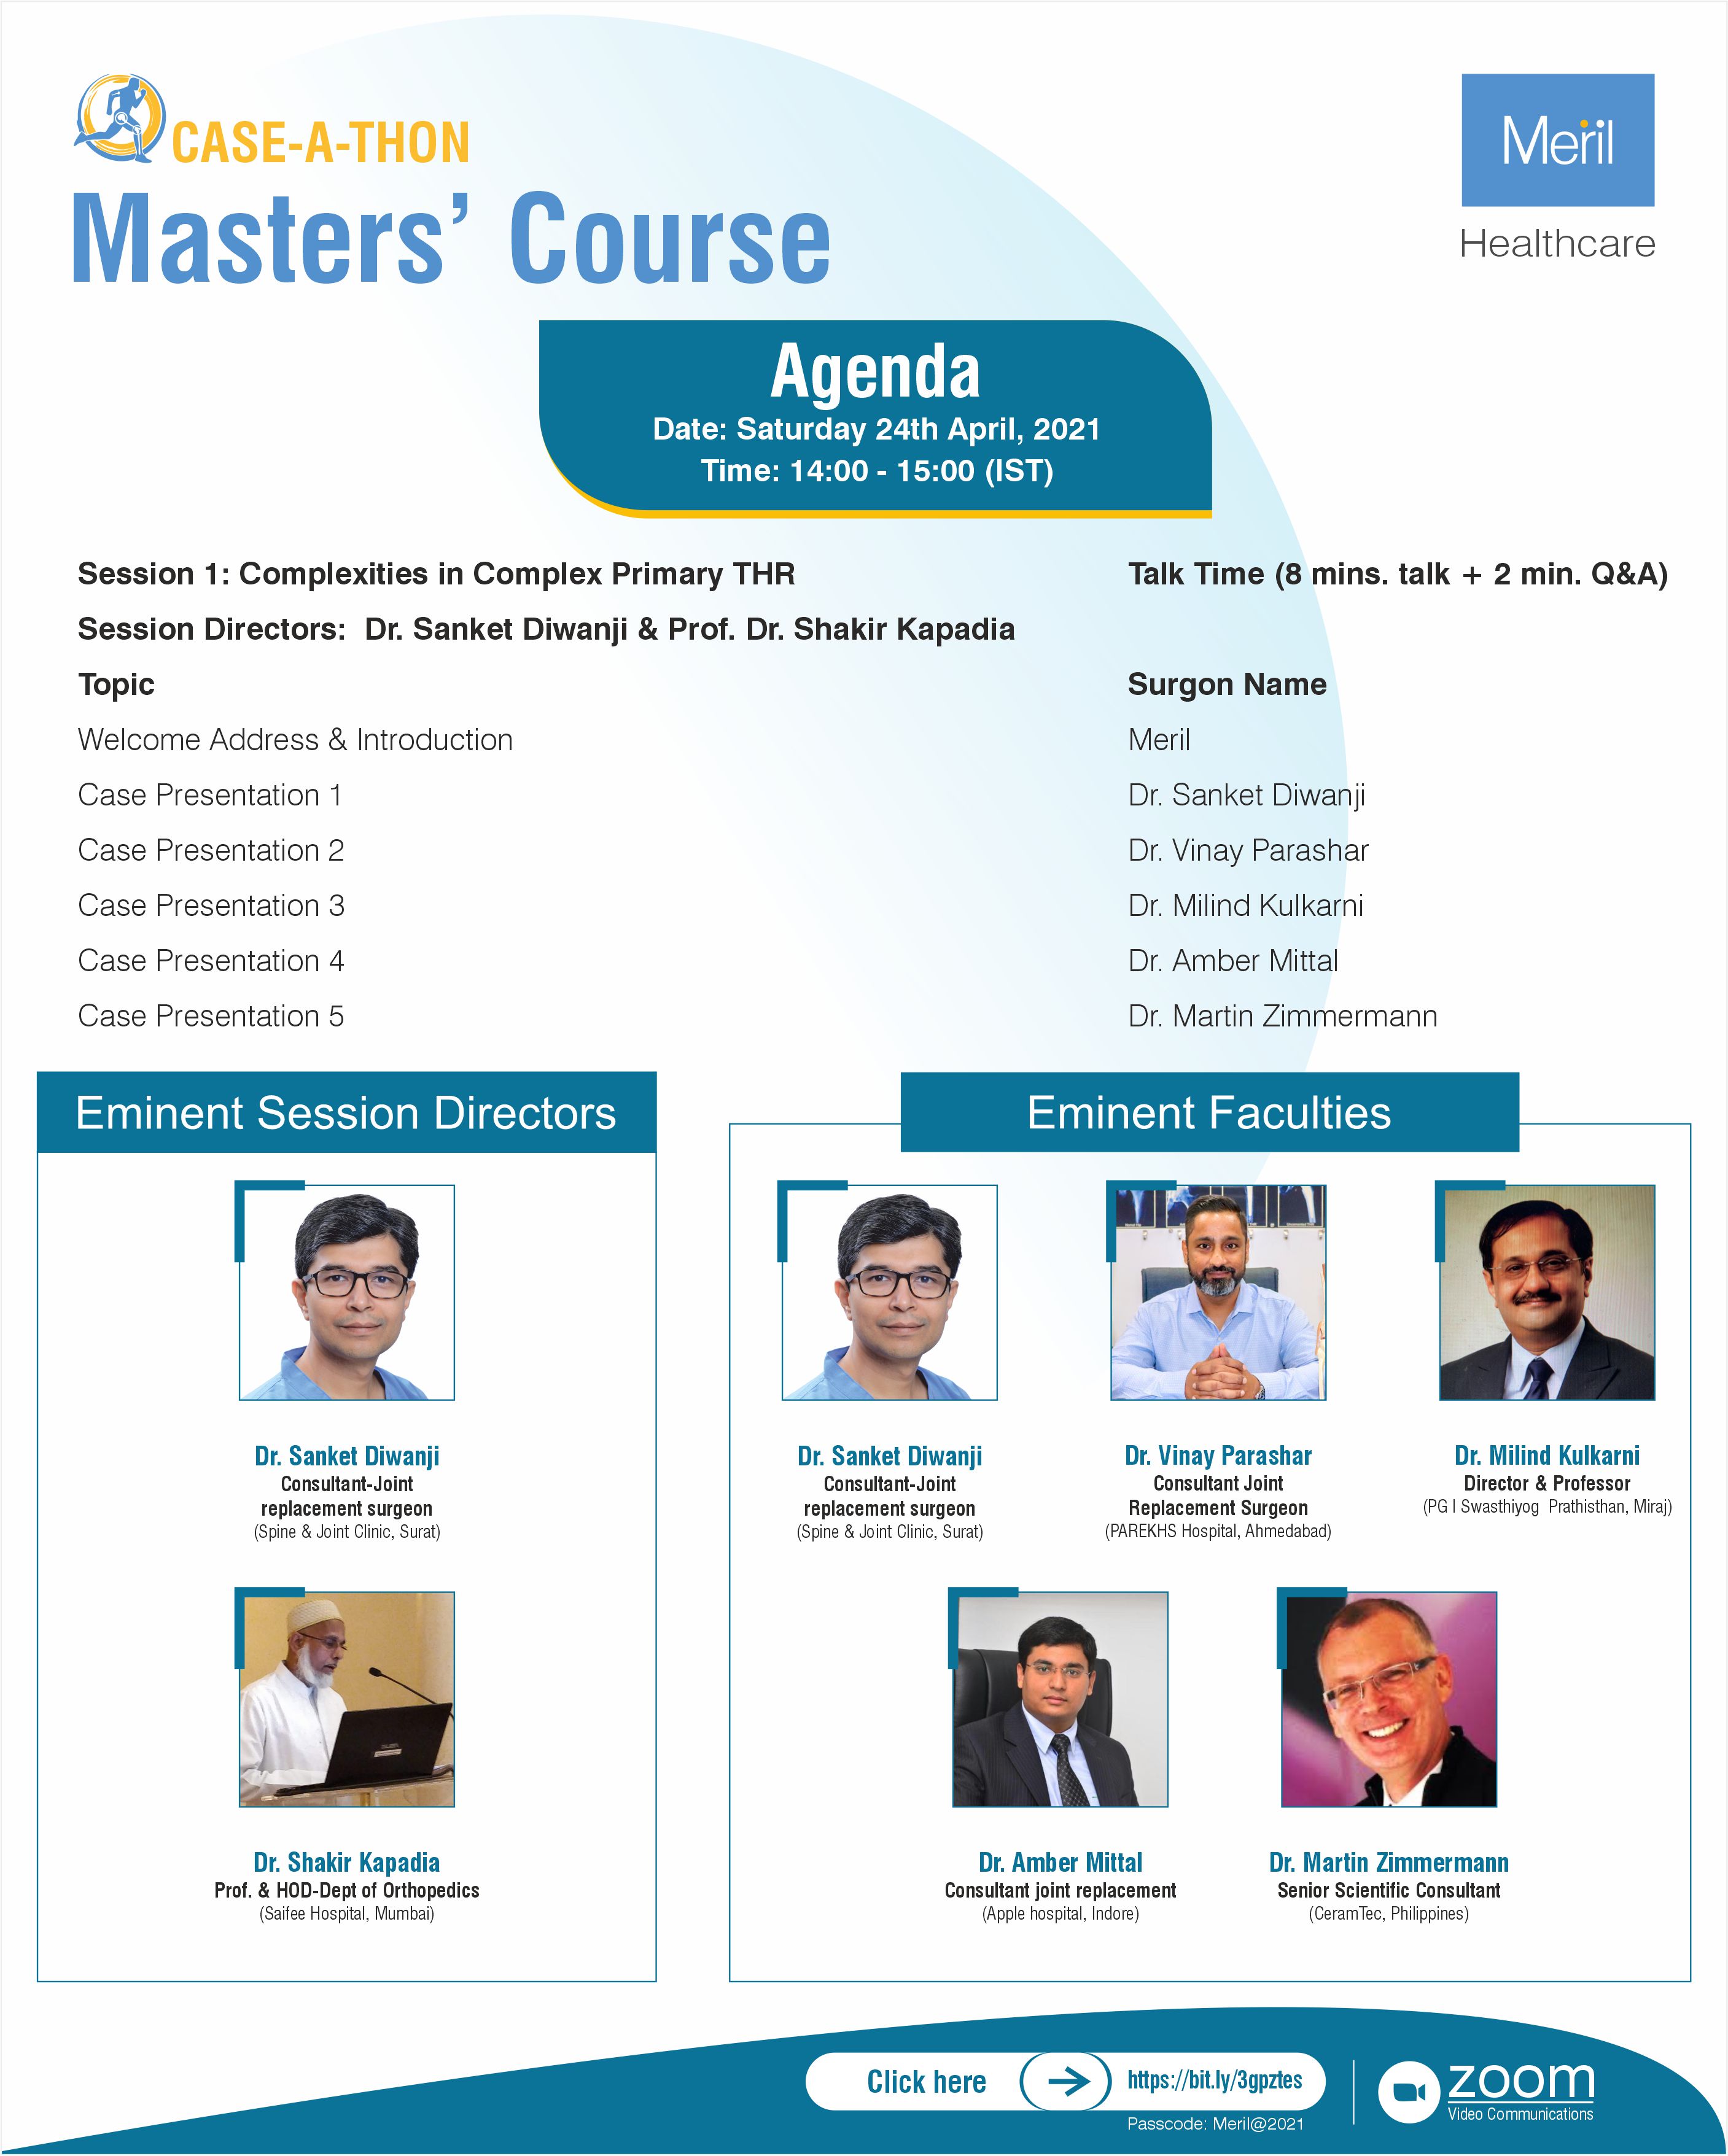 Masters' Course- Case A Thon